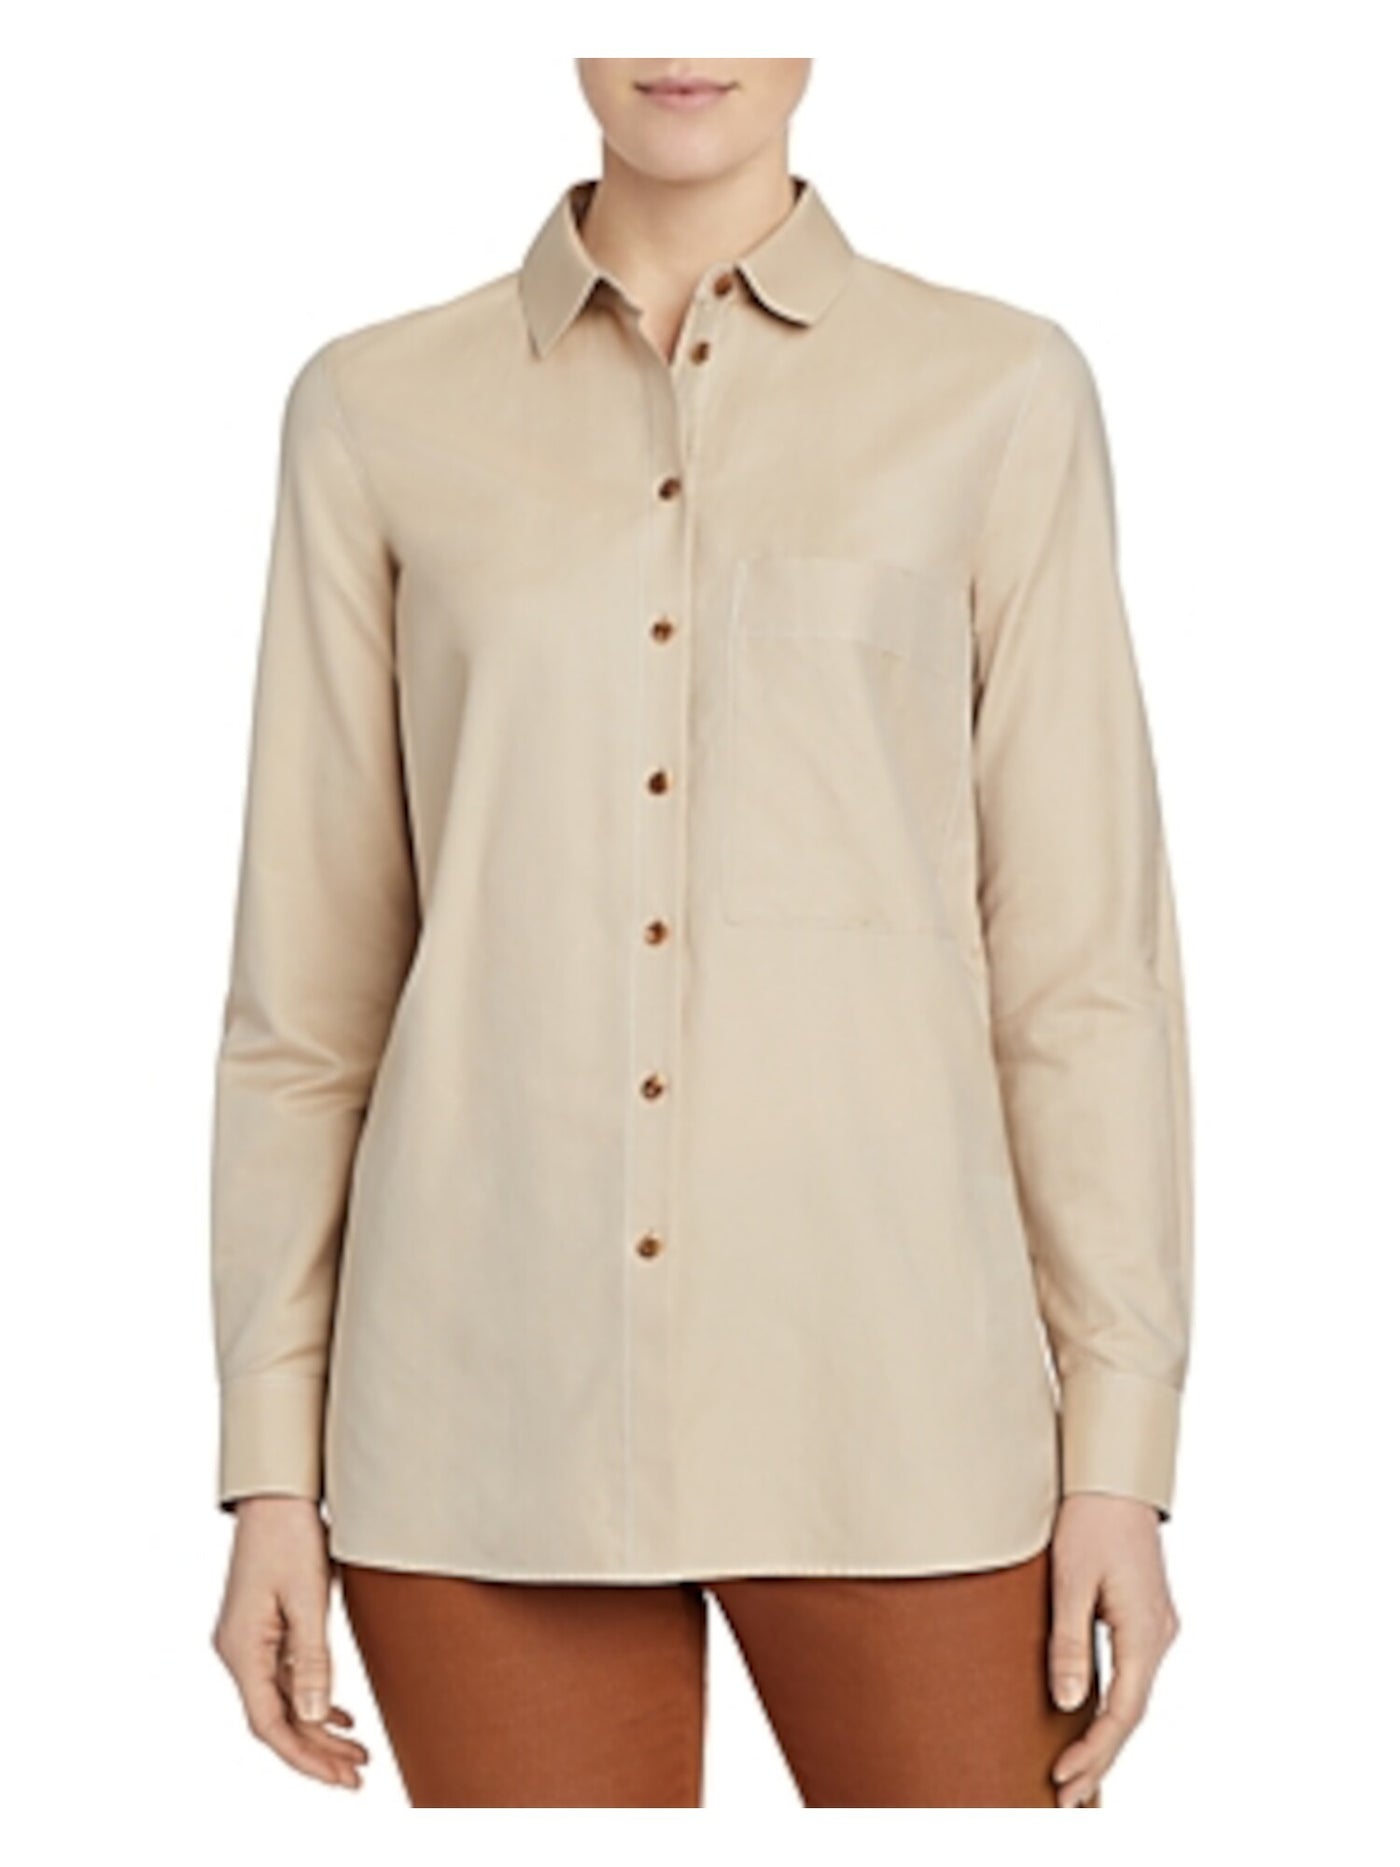 LAFAYETTE 148 Womens Beige Pocketed Vented Hem Cuffed Sleeve Collared Wear To Work Button Up Top L